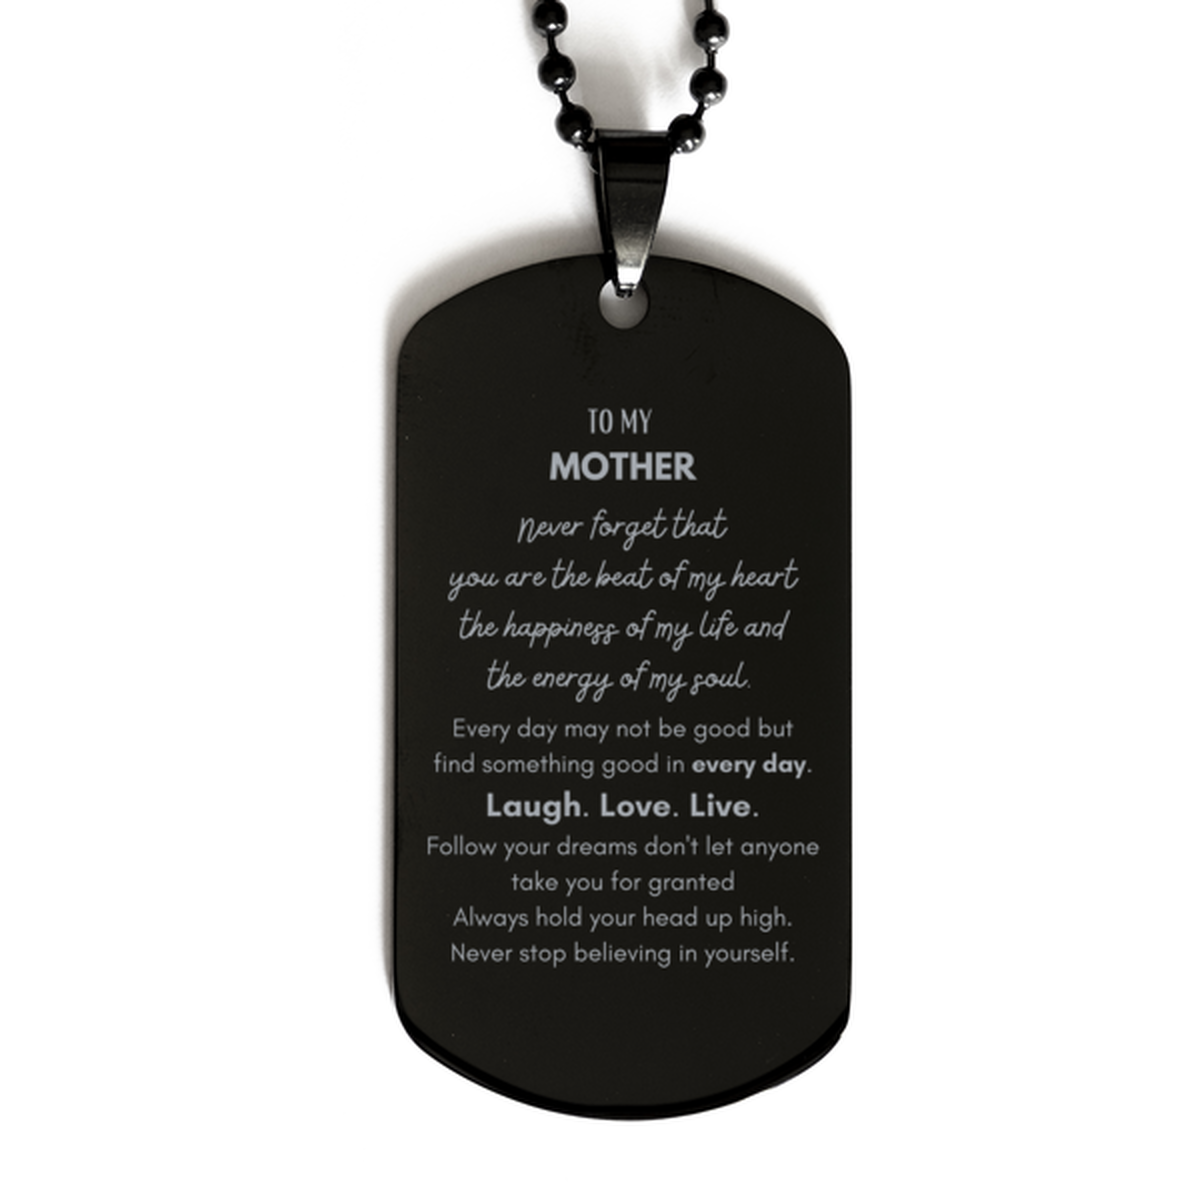 To My Mother Dogtag Gifts, Christmas Mother Black Dog Tag Present, Birthday Unique Motivational For Mother, To My Mother Never forget that you are the beat of my heart the happiness of my life and the energy of my soul